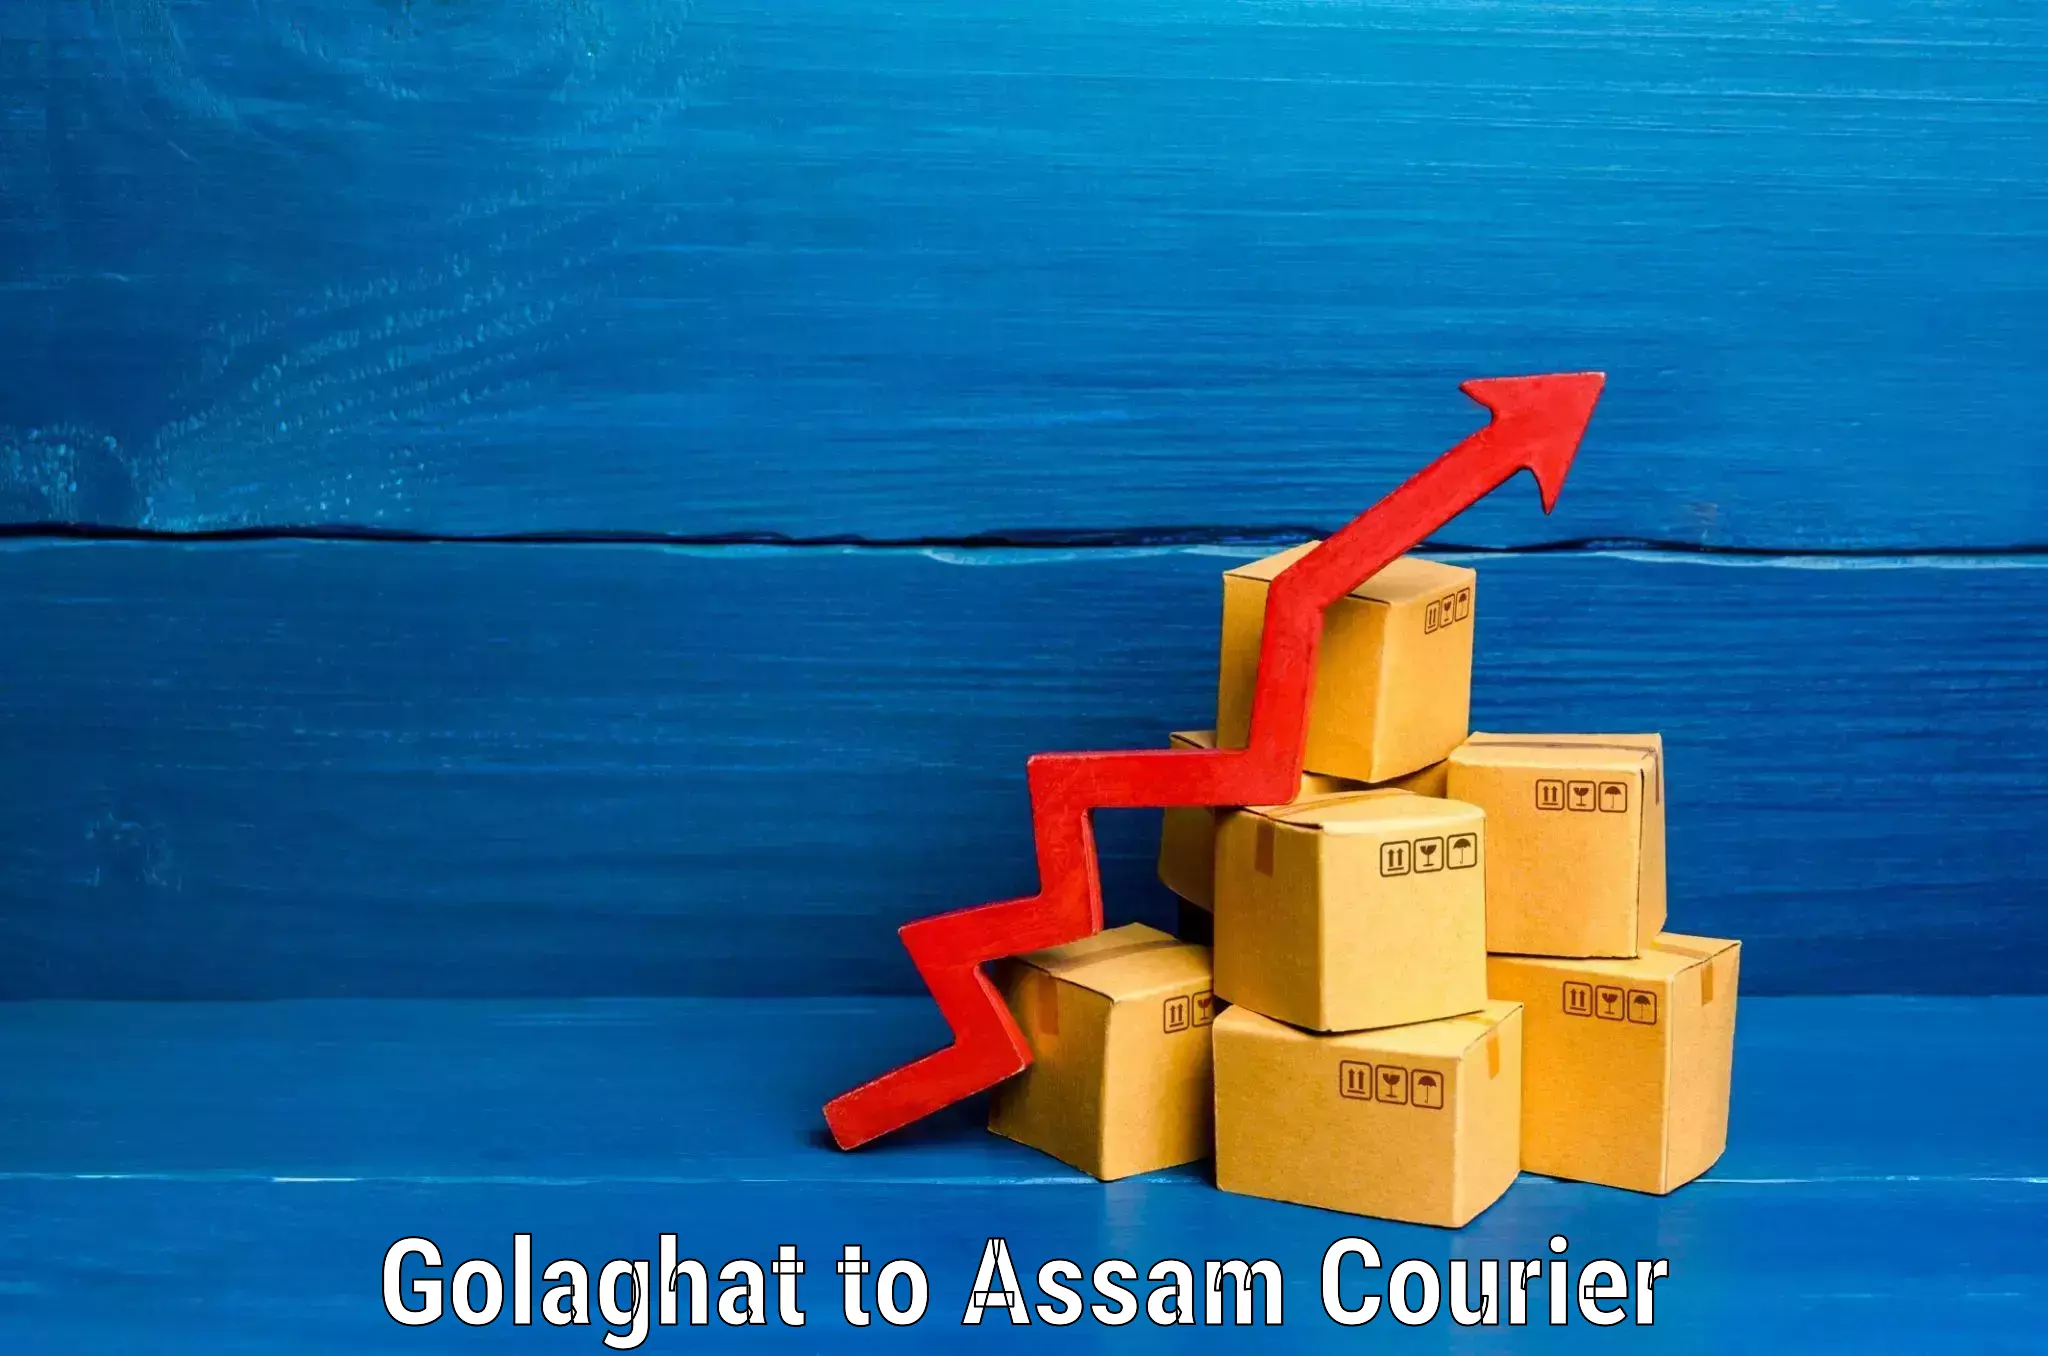 Luggage delivery app Golaghat to Tezpur